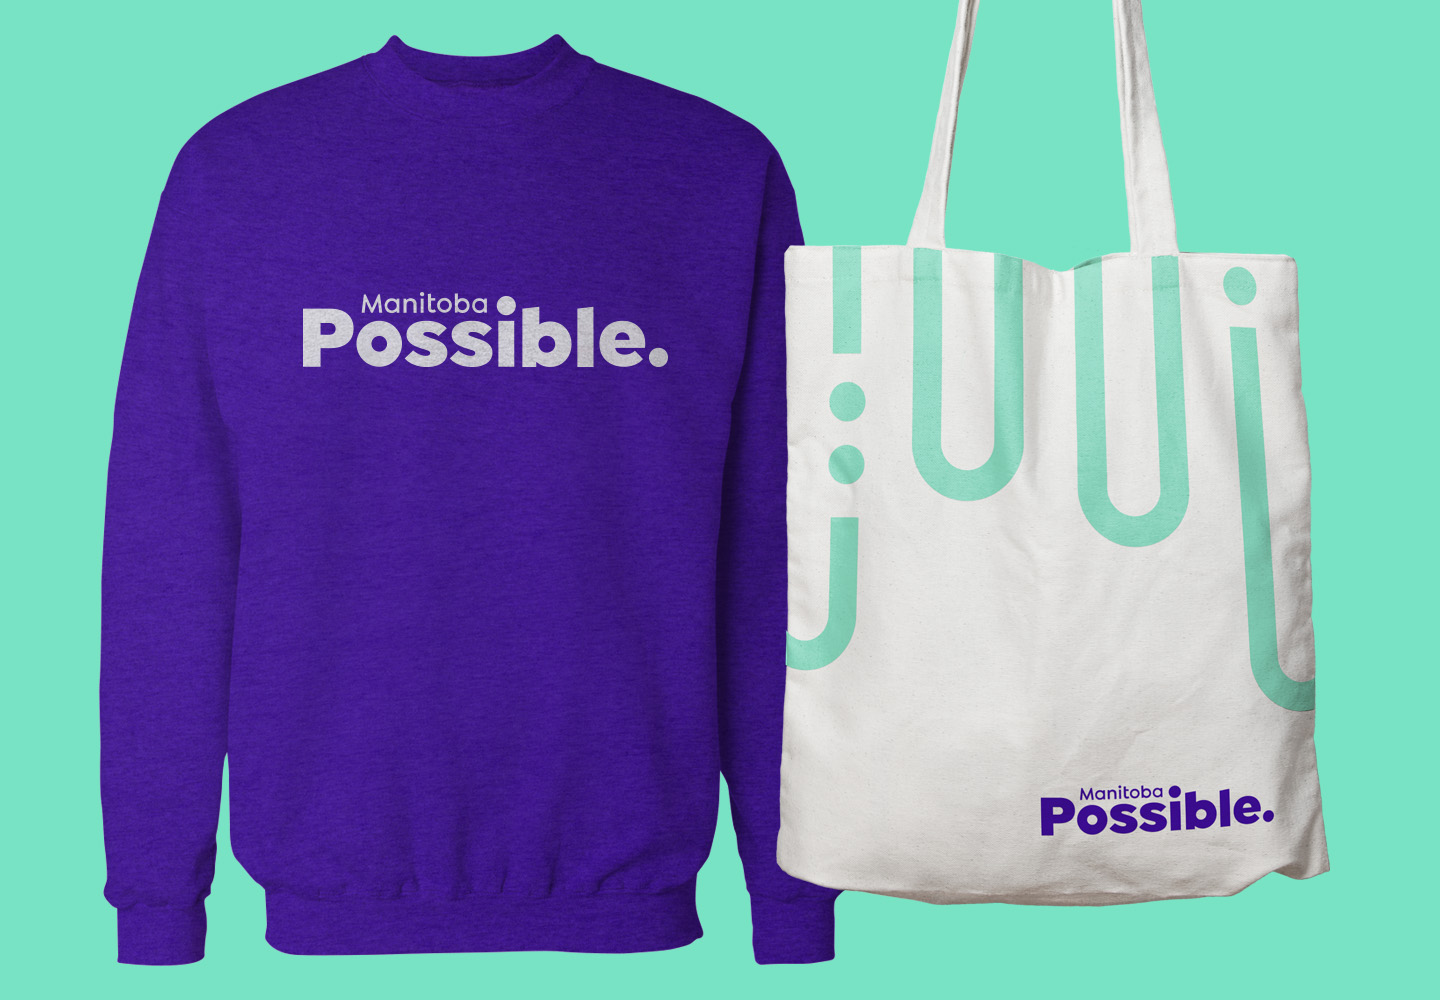 Manitoba Possible purple sweatshirt example and tote bag with the Manitoba Possible motif.